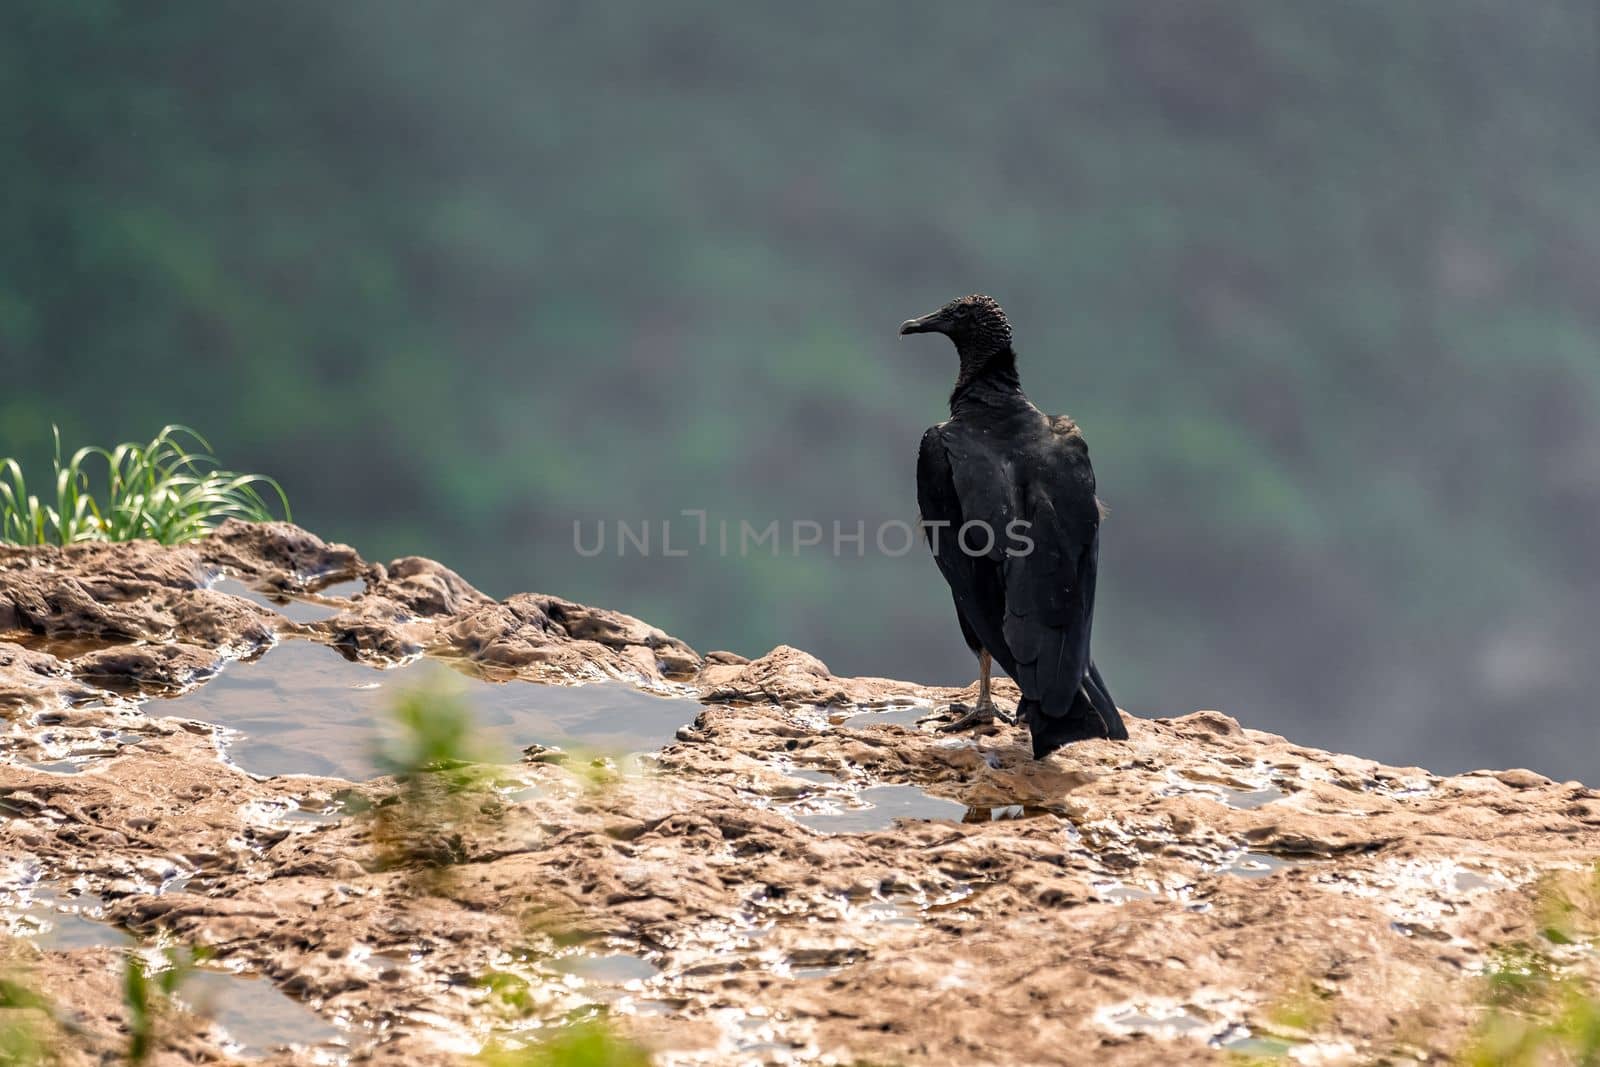 condor sitting on a rock in nature by Edophoto